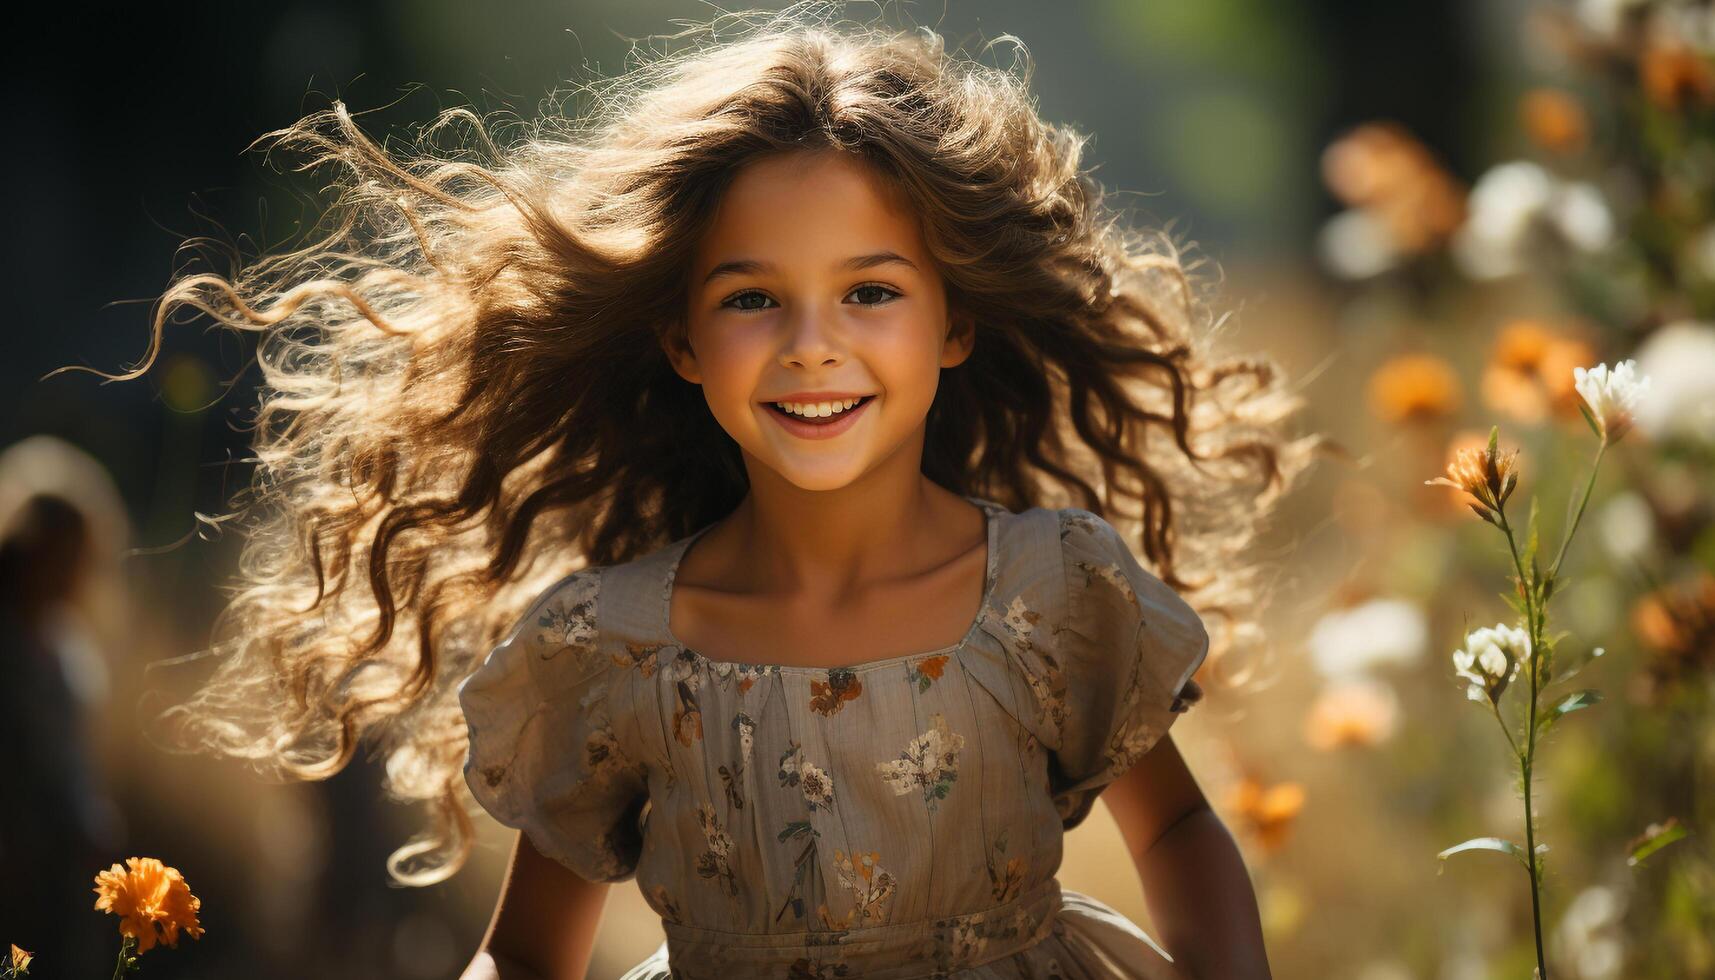 AI generated Smiling girl enjoys nature, carefree and happy in the sun generated by AI photo